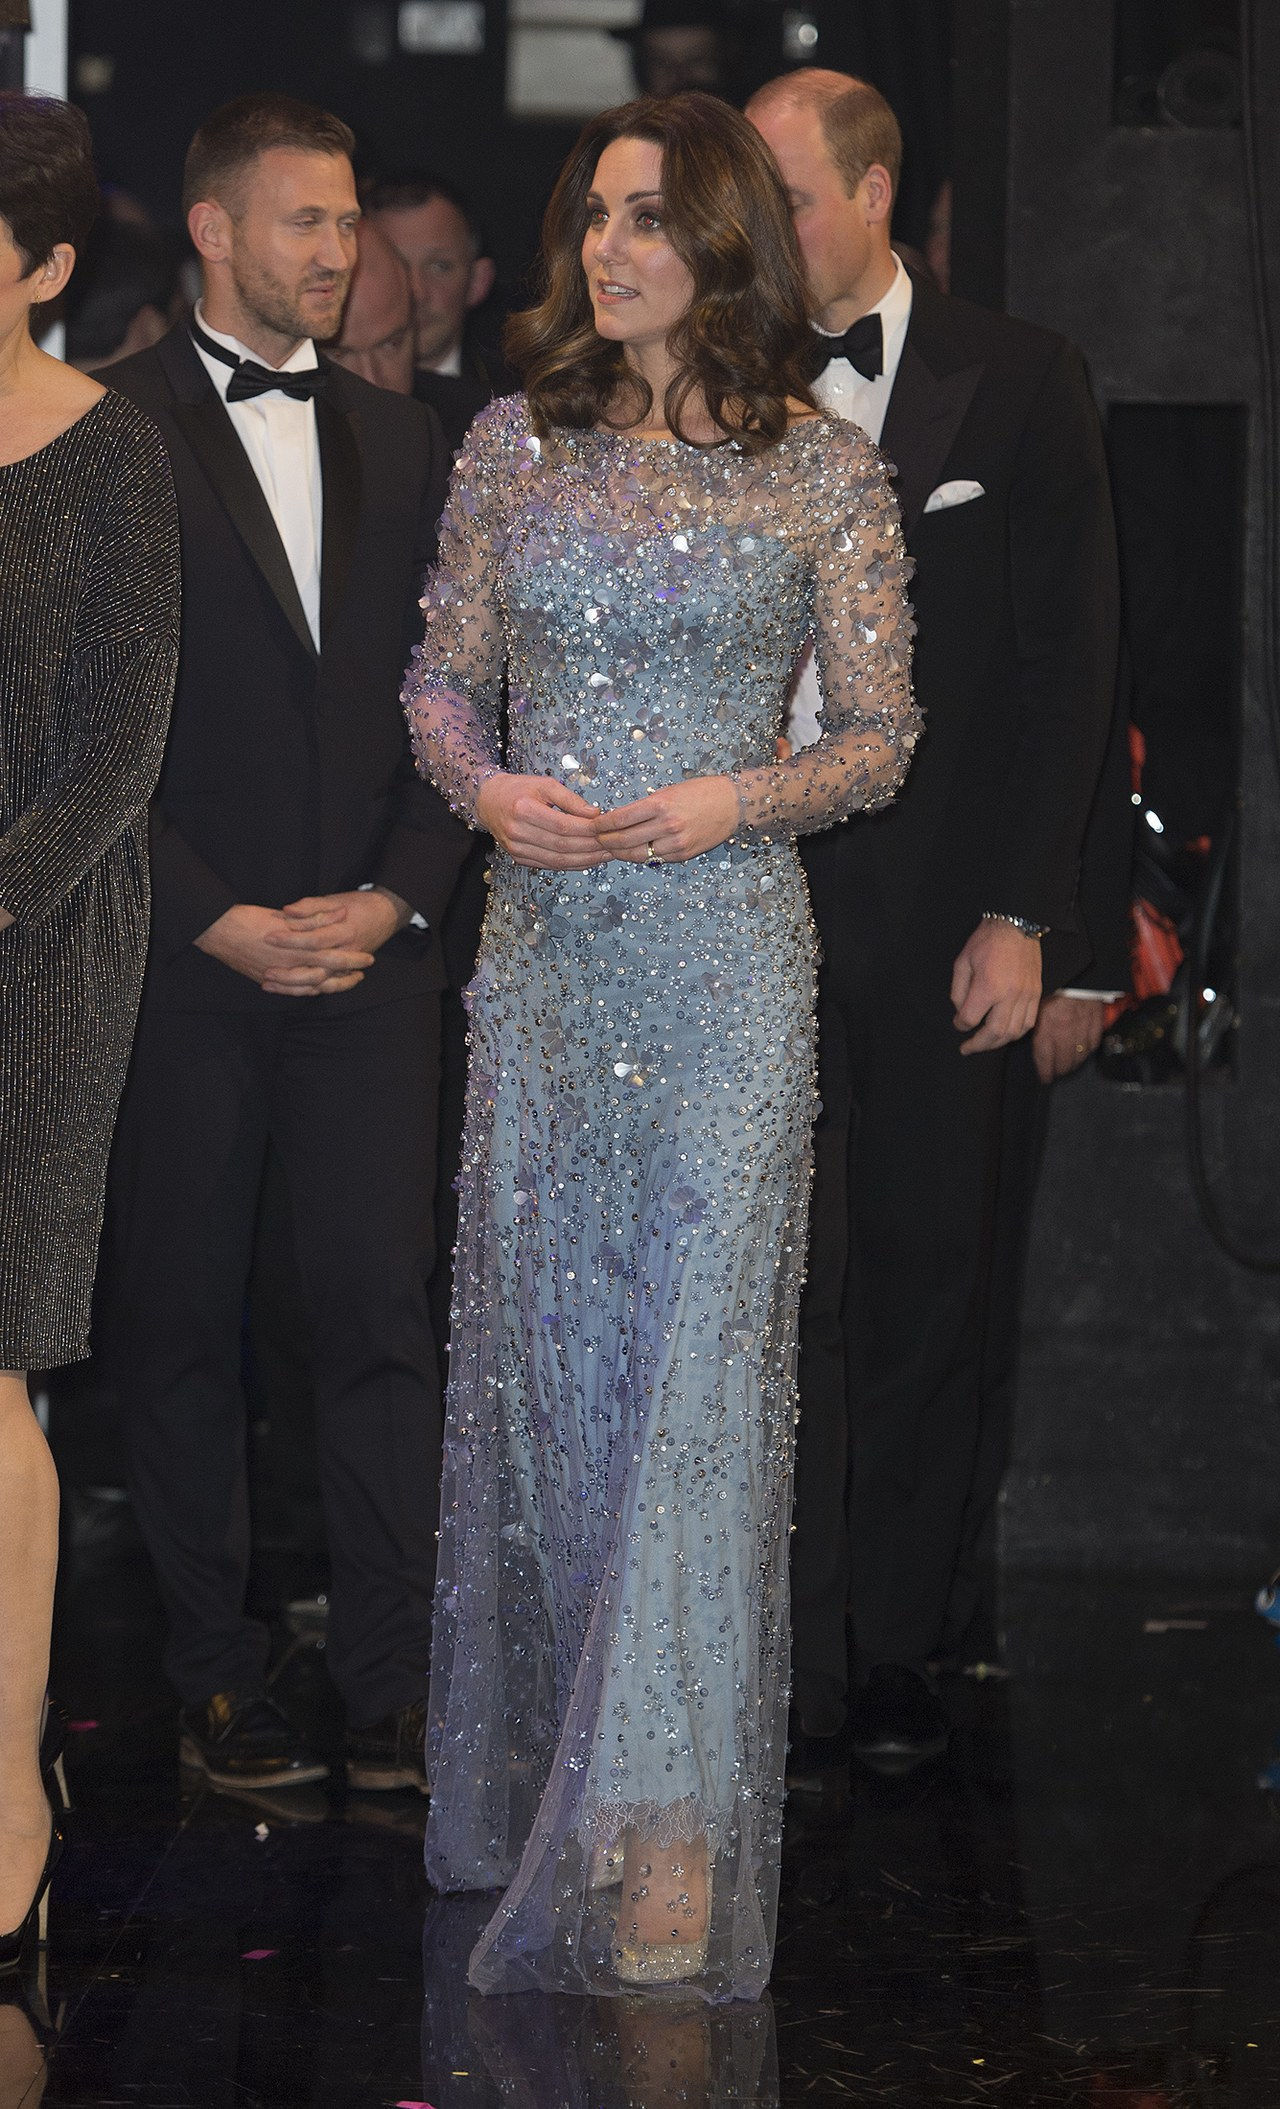 los Duke & Duchess Of Cambridge Attend The Royal Variety Performance